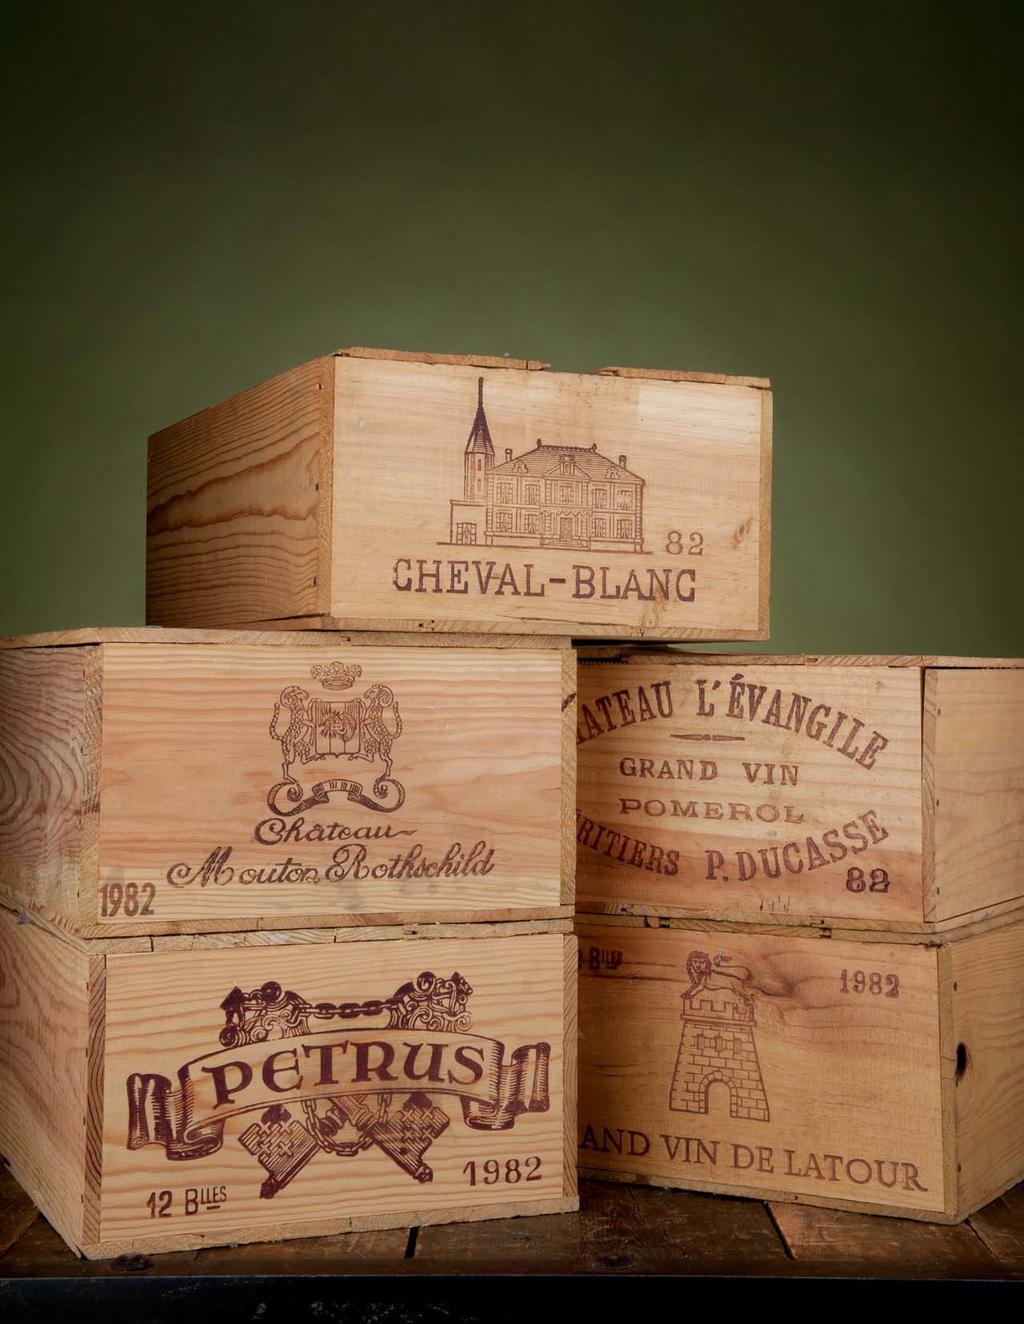 A CELLAR OF LEGENDARY WINES WITH IMPORTANT PROVENANCE Almost two decades ago, a run of high-profile auctions from a number of the most famous wine collections ever accumulated captured the attention